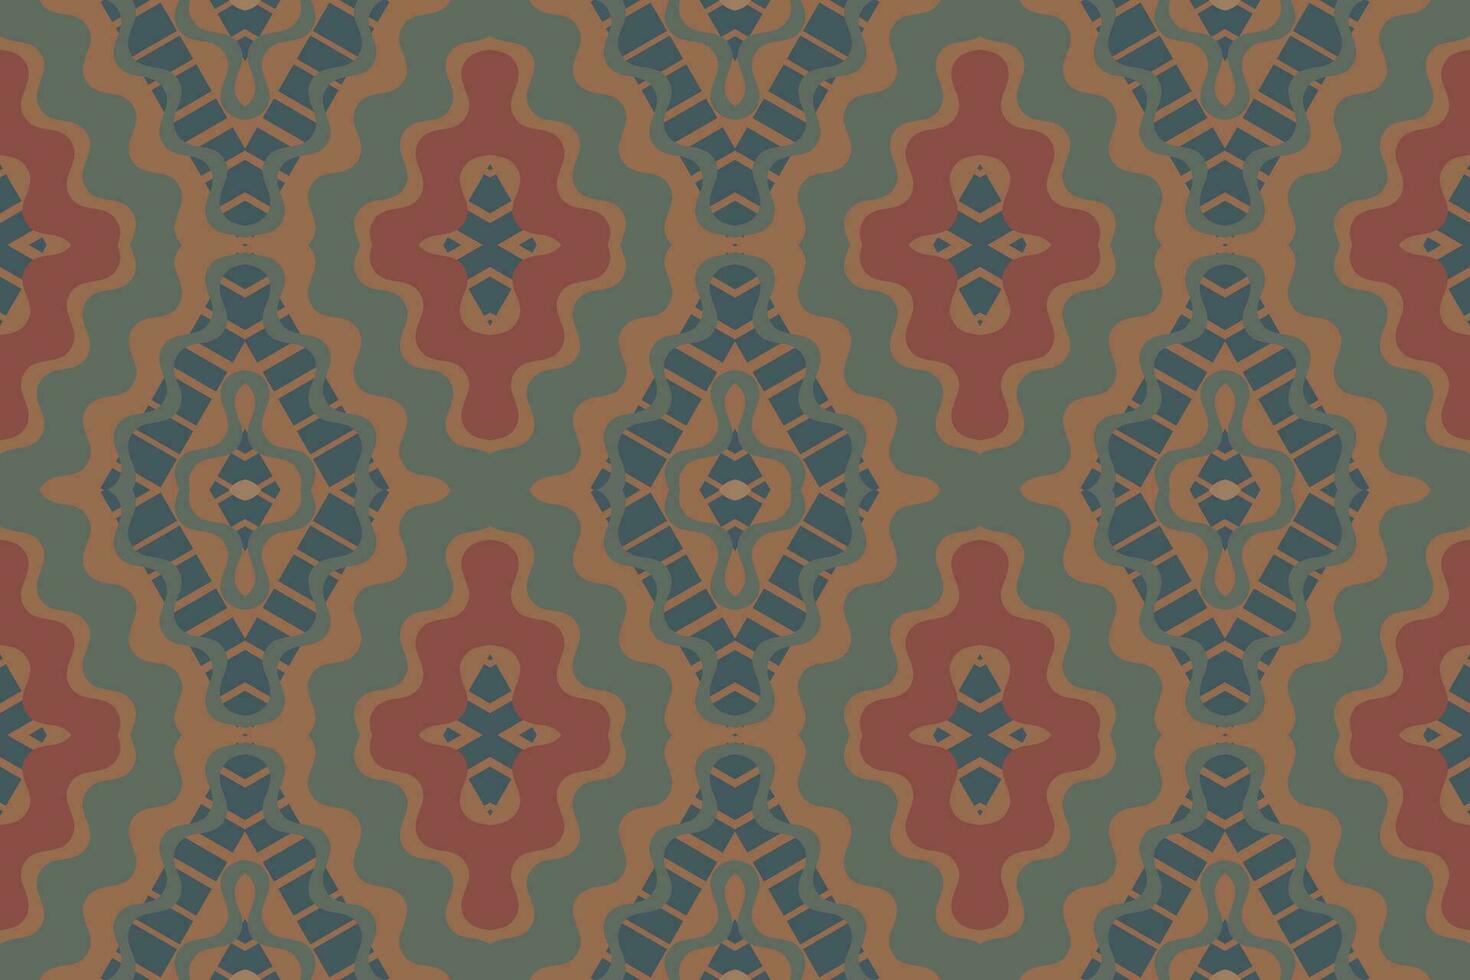 Motif Ikat Paisley Embroidery Background. Ikat Design Geometric Ethnic Oriental Pattern traditional.aztec Style Abstract Vector illustration.design for Texture,fabric,clothing,wrapping,sarong.